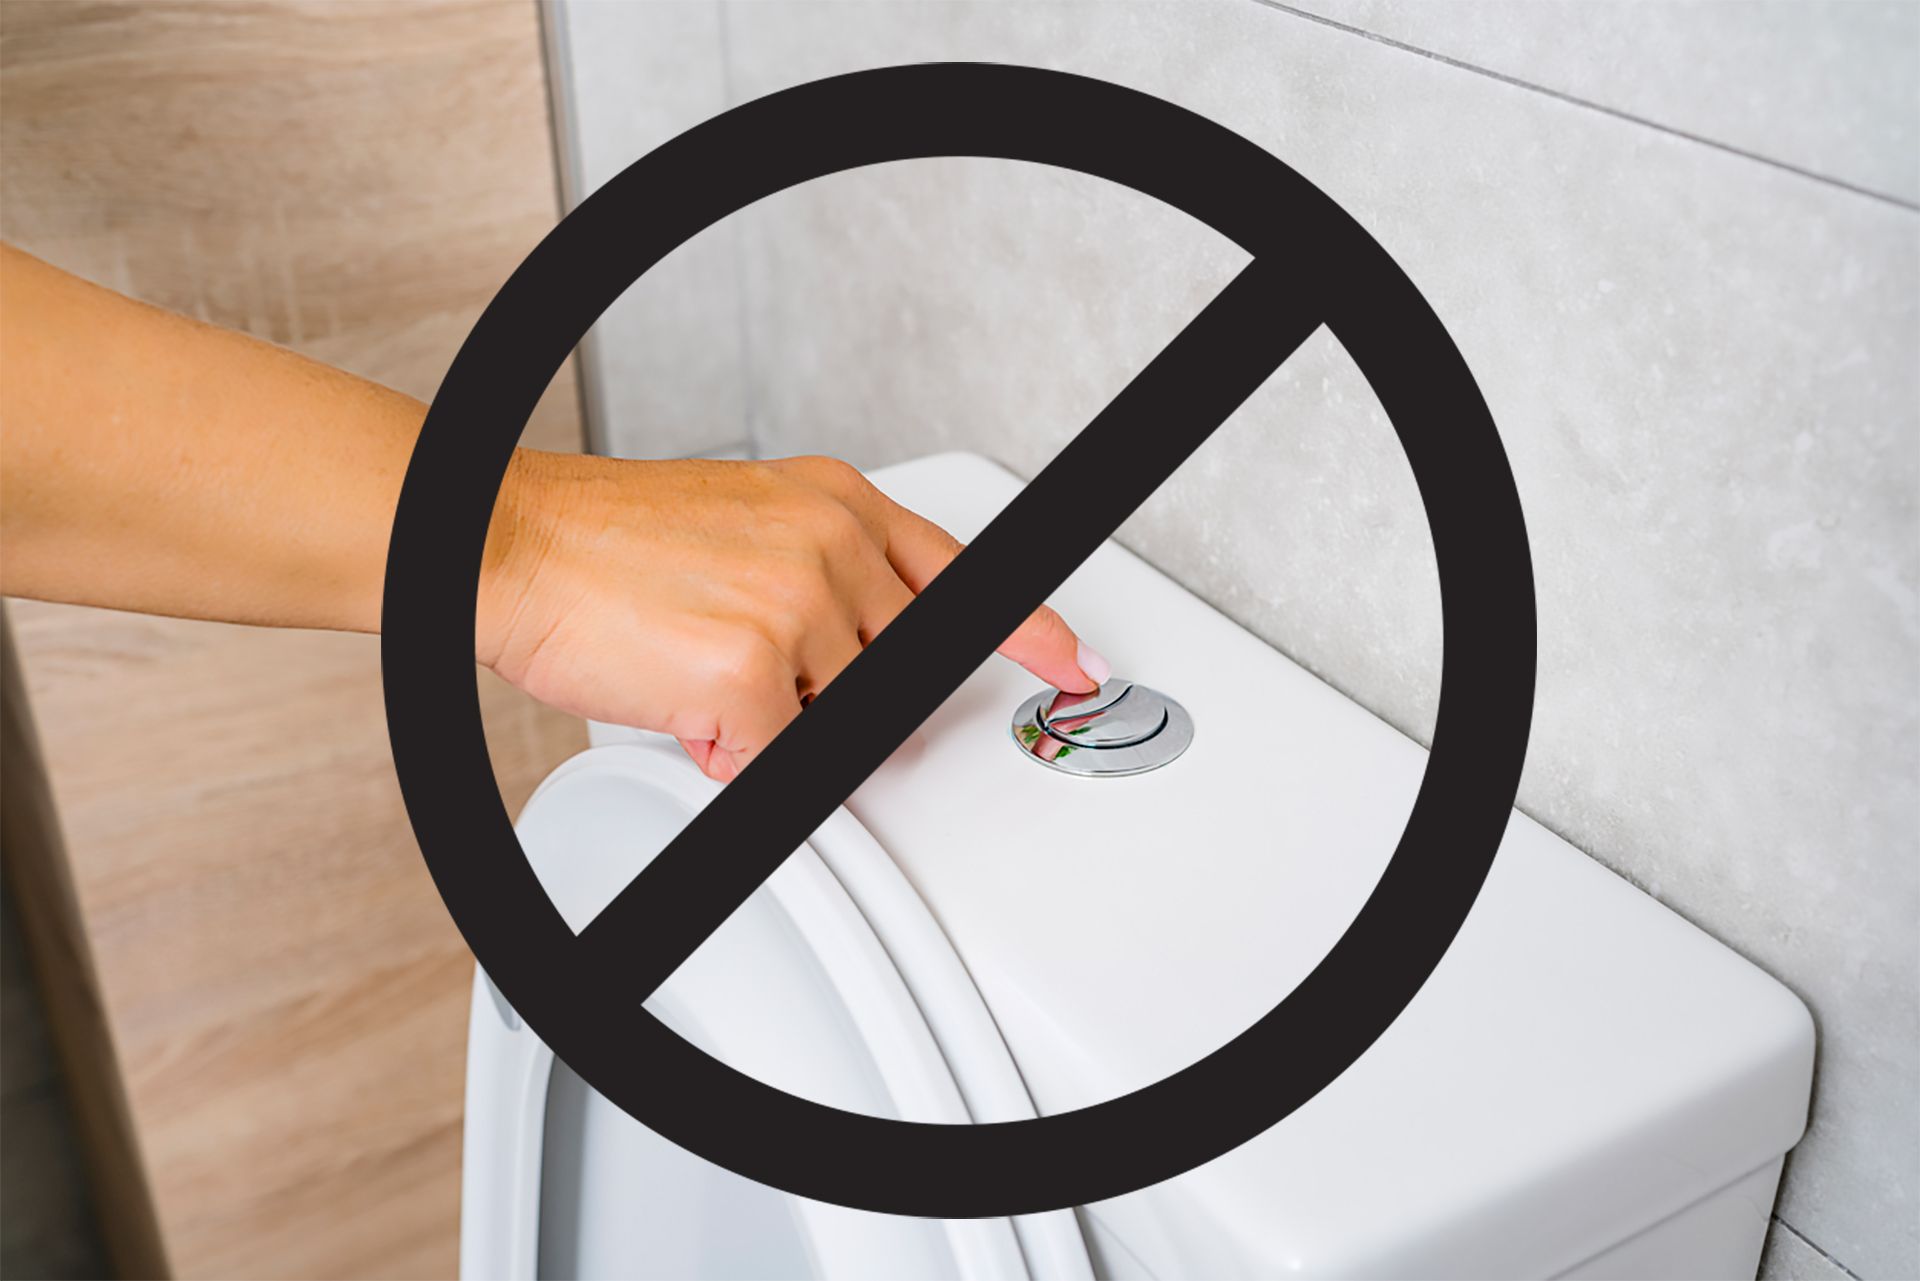 Top 8 Household Items to Avoid Flushing